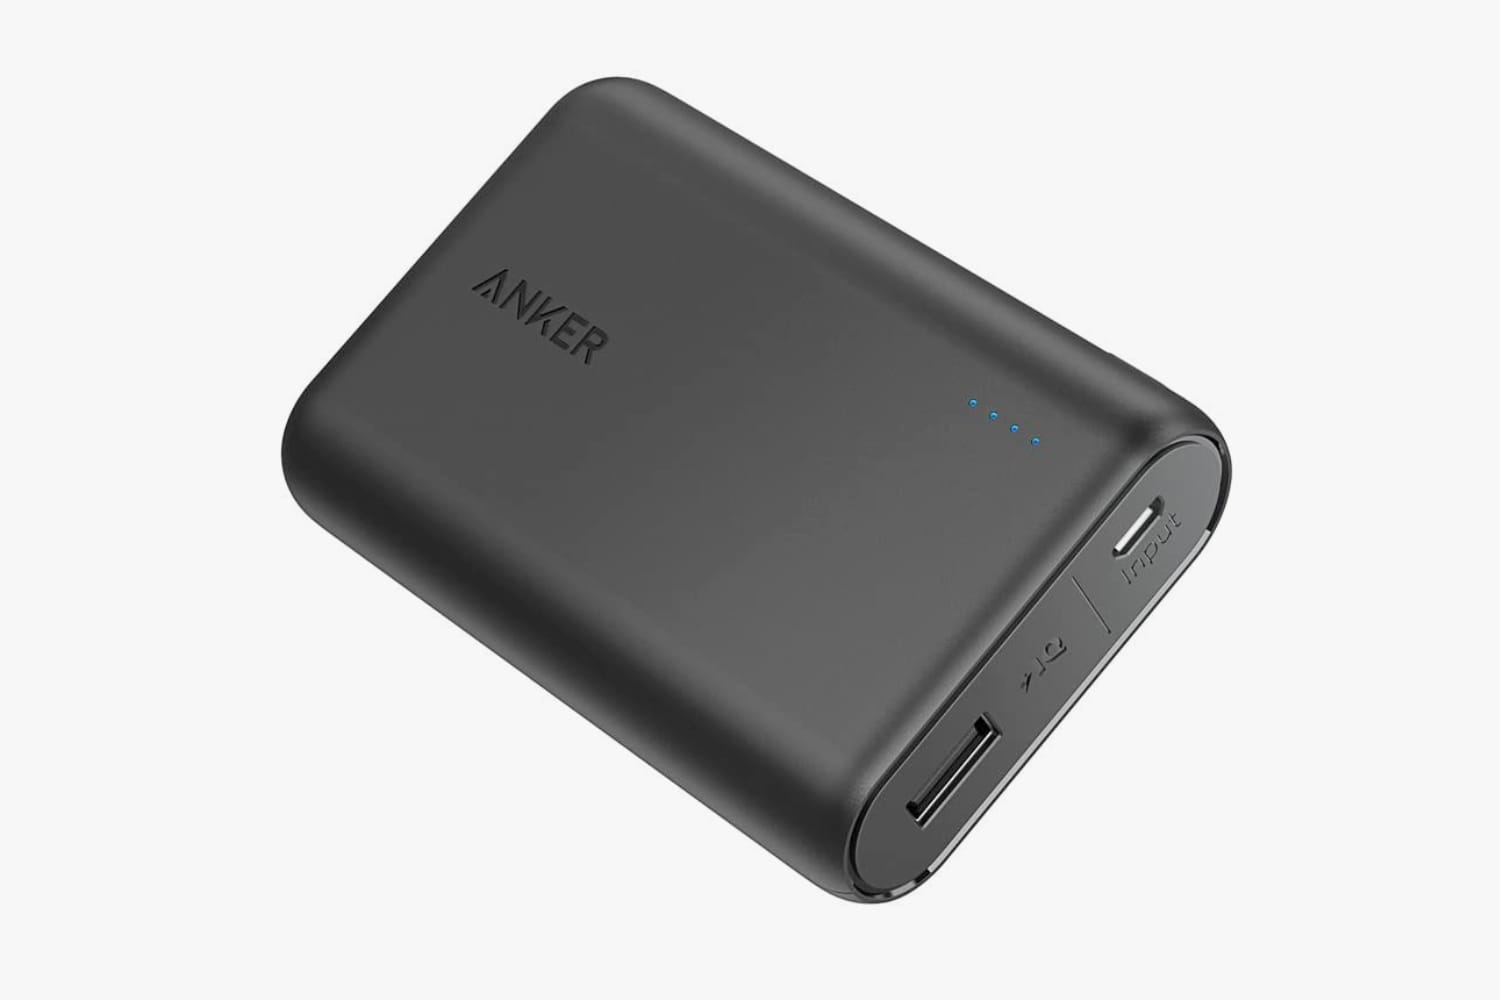 Anker Powercore 10000 Portable Charger